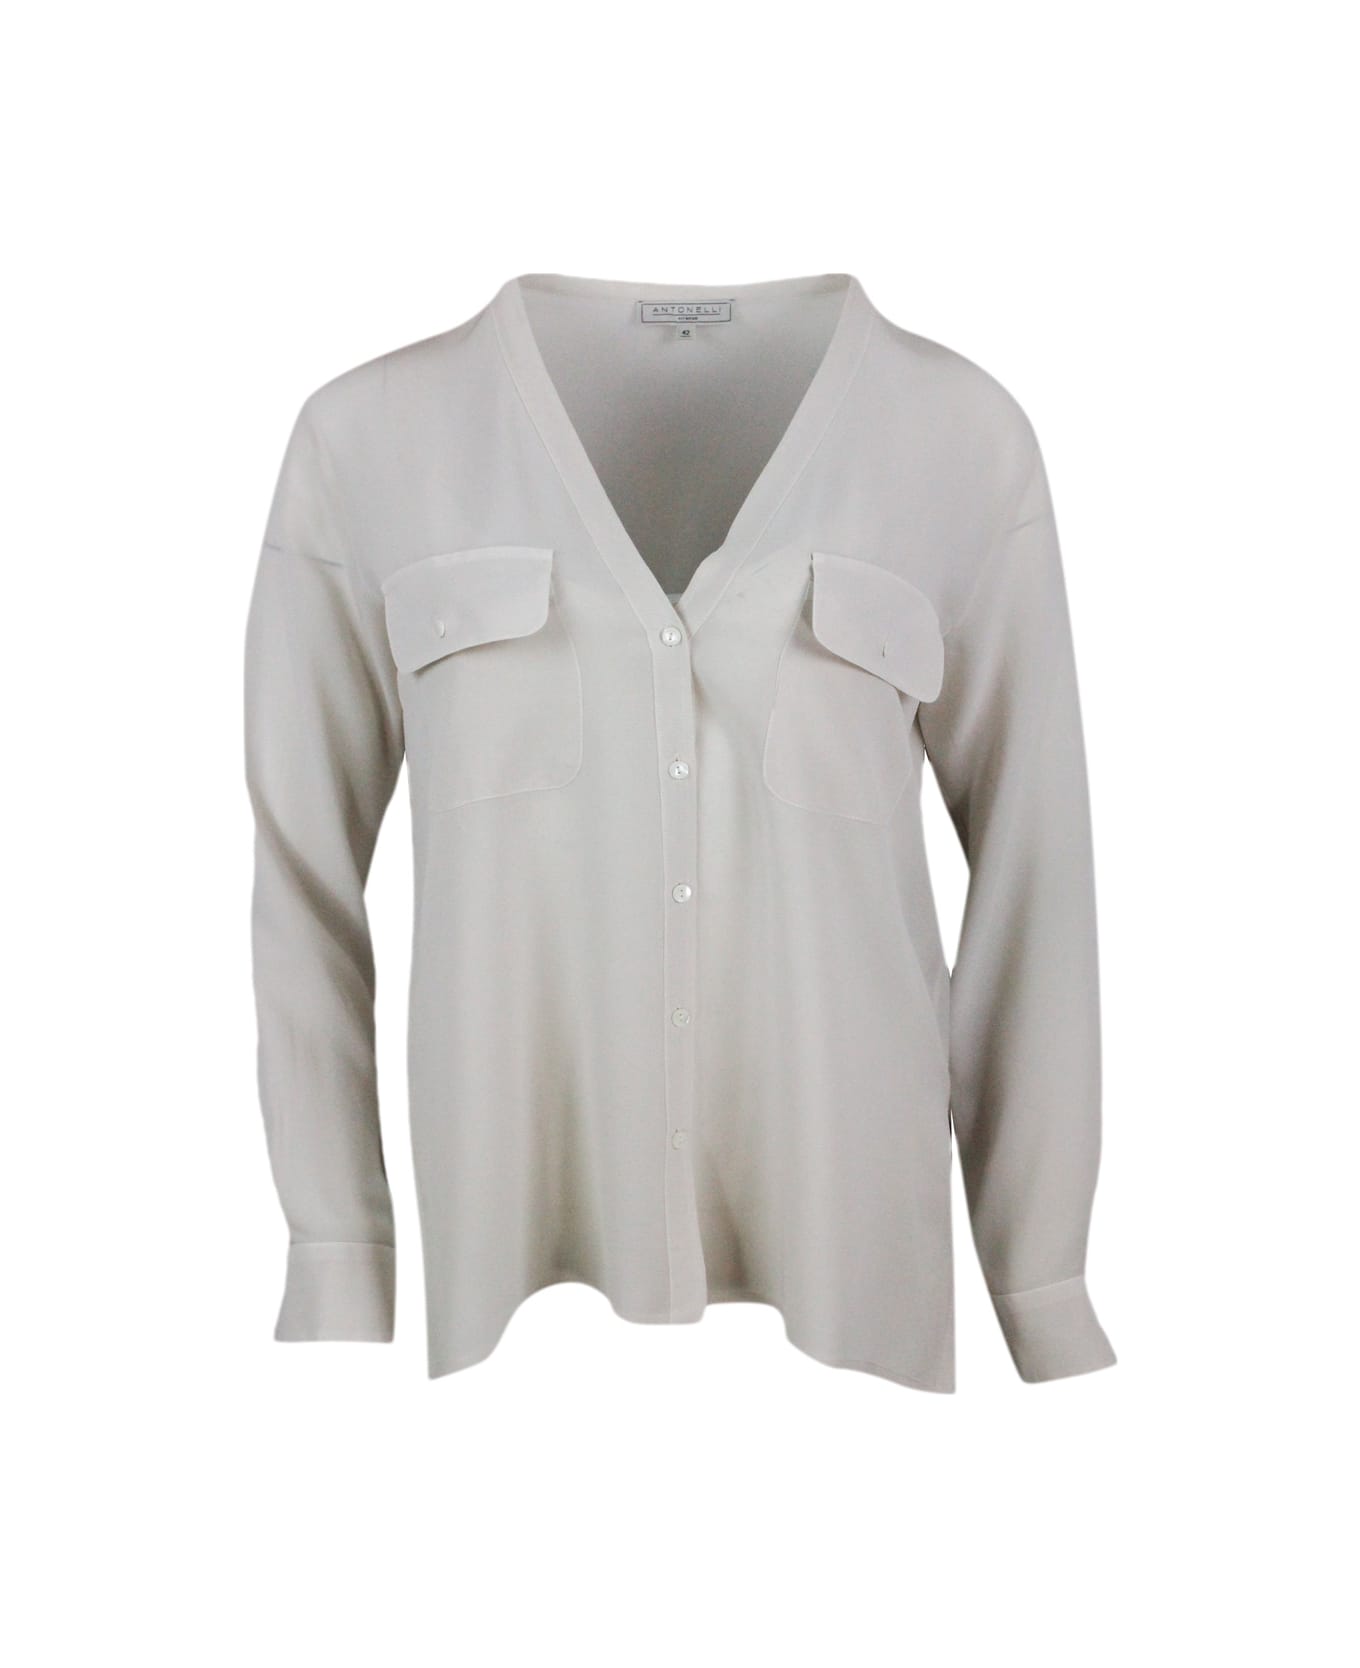 Antonelli Shirt Made Of Soft Stretch Silk, With V-neck, Chest Pockets And Button Closure - Beige